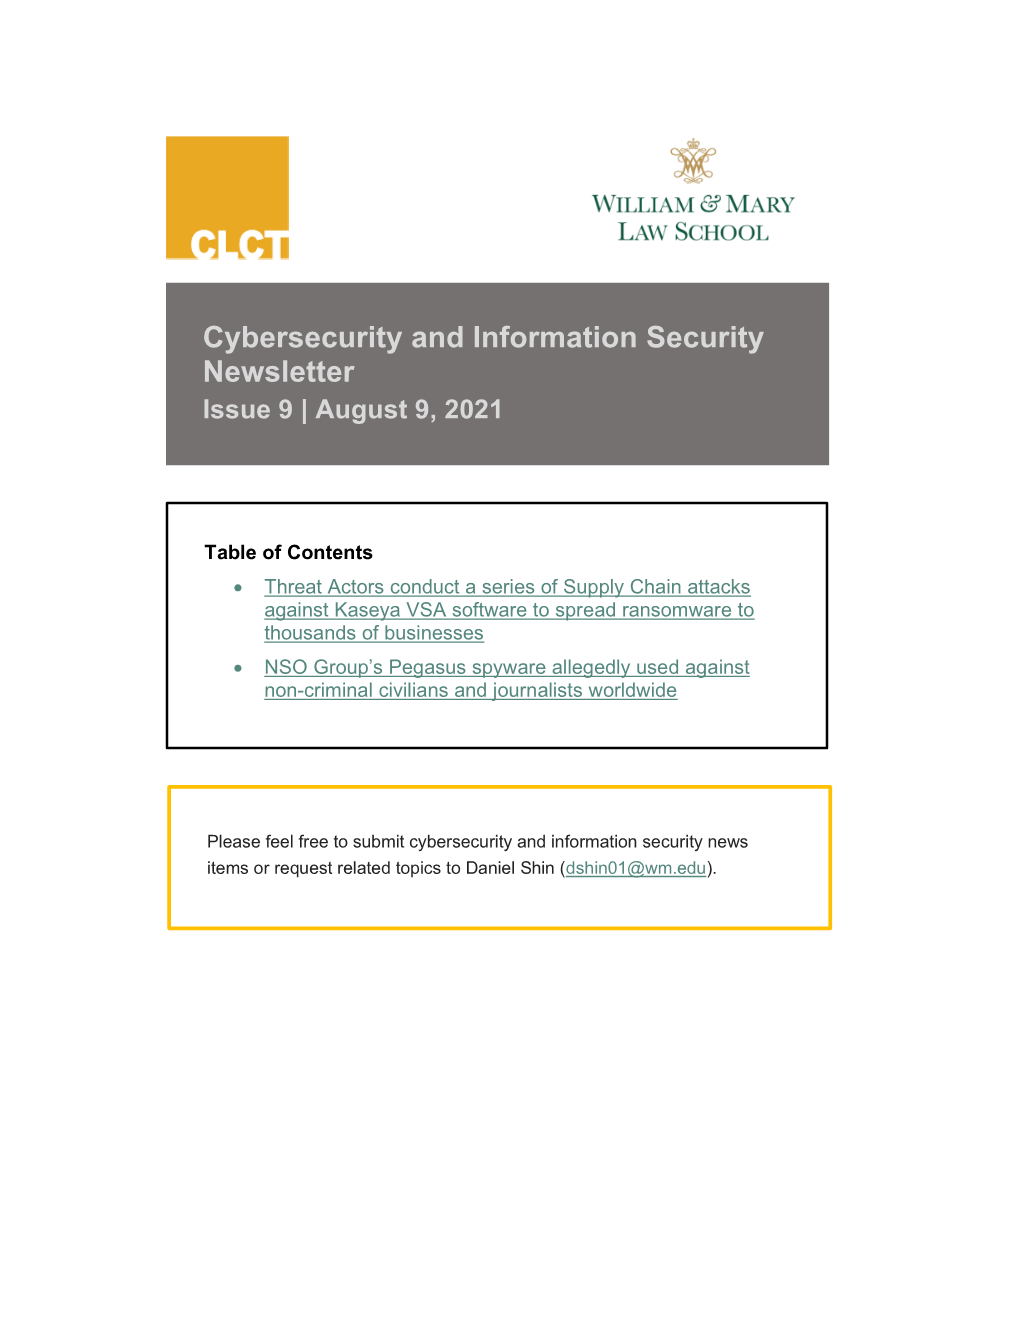 Cybersecurity and Information Security Newsletter Issue 9 | August 9, 2021